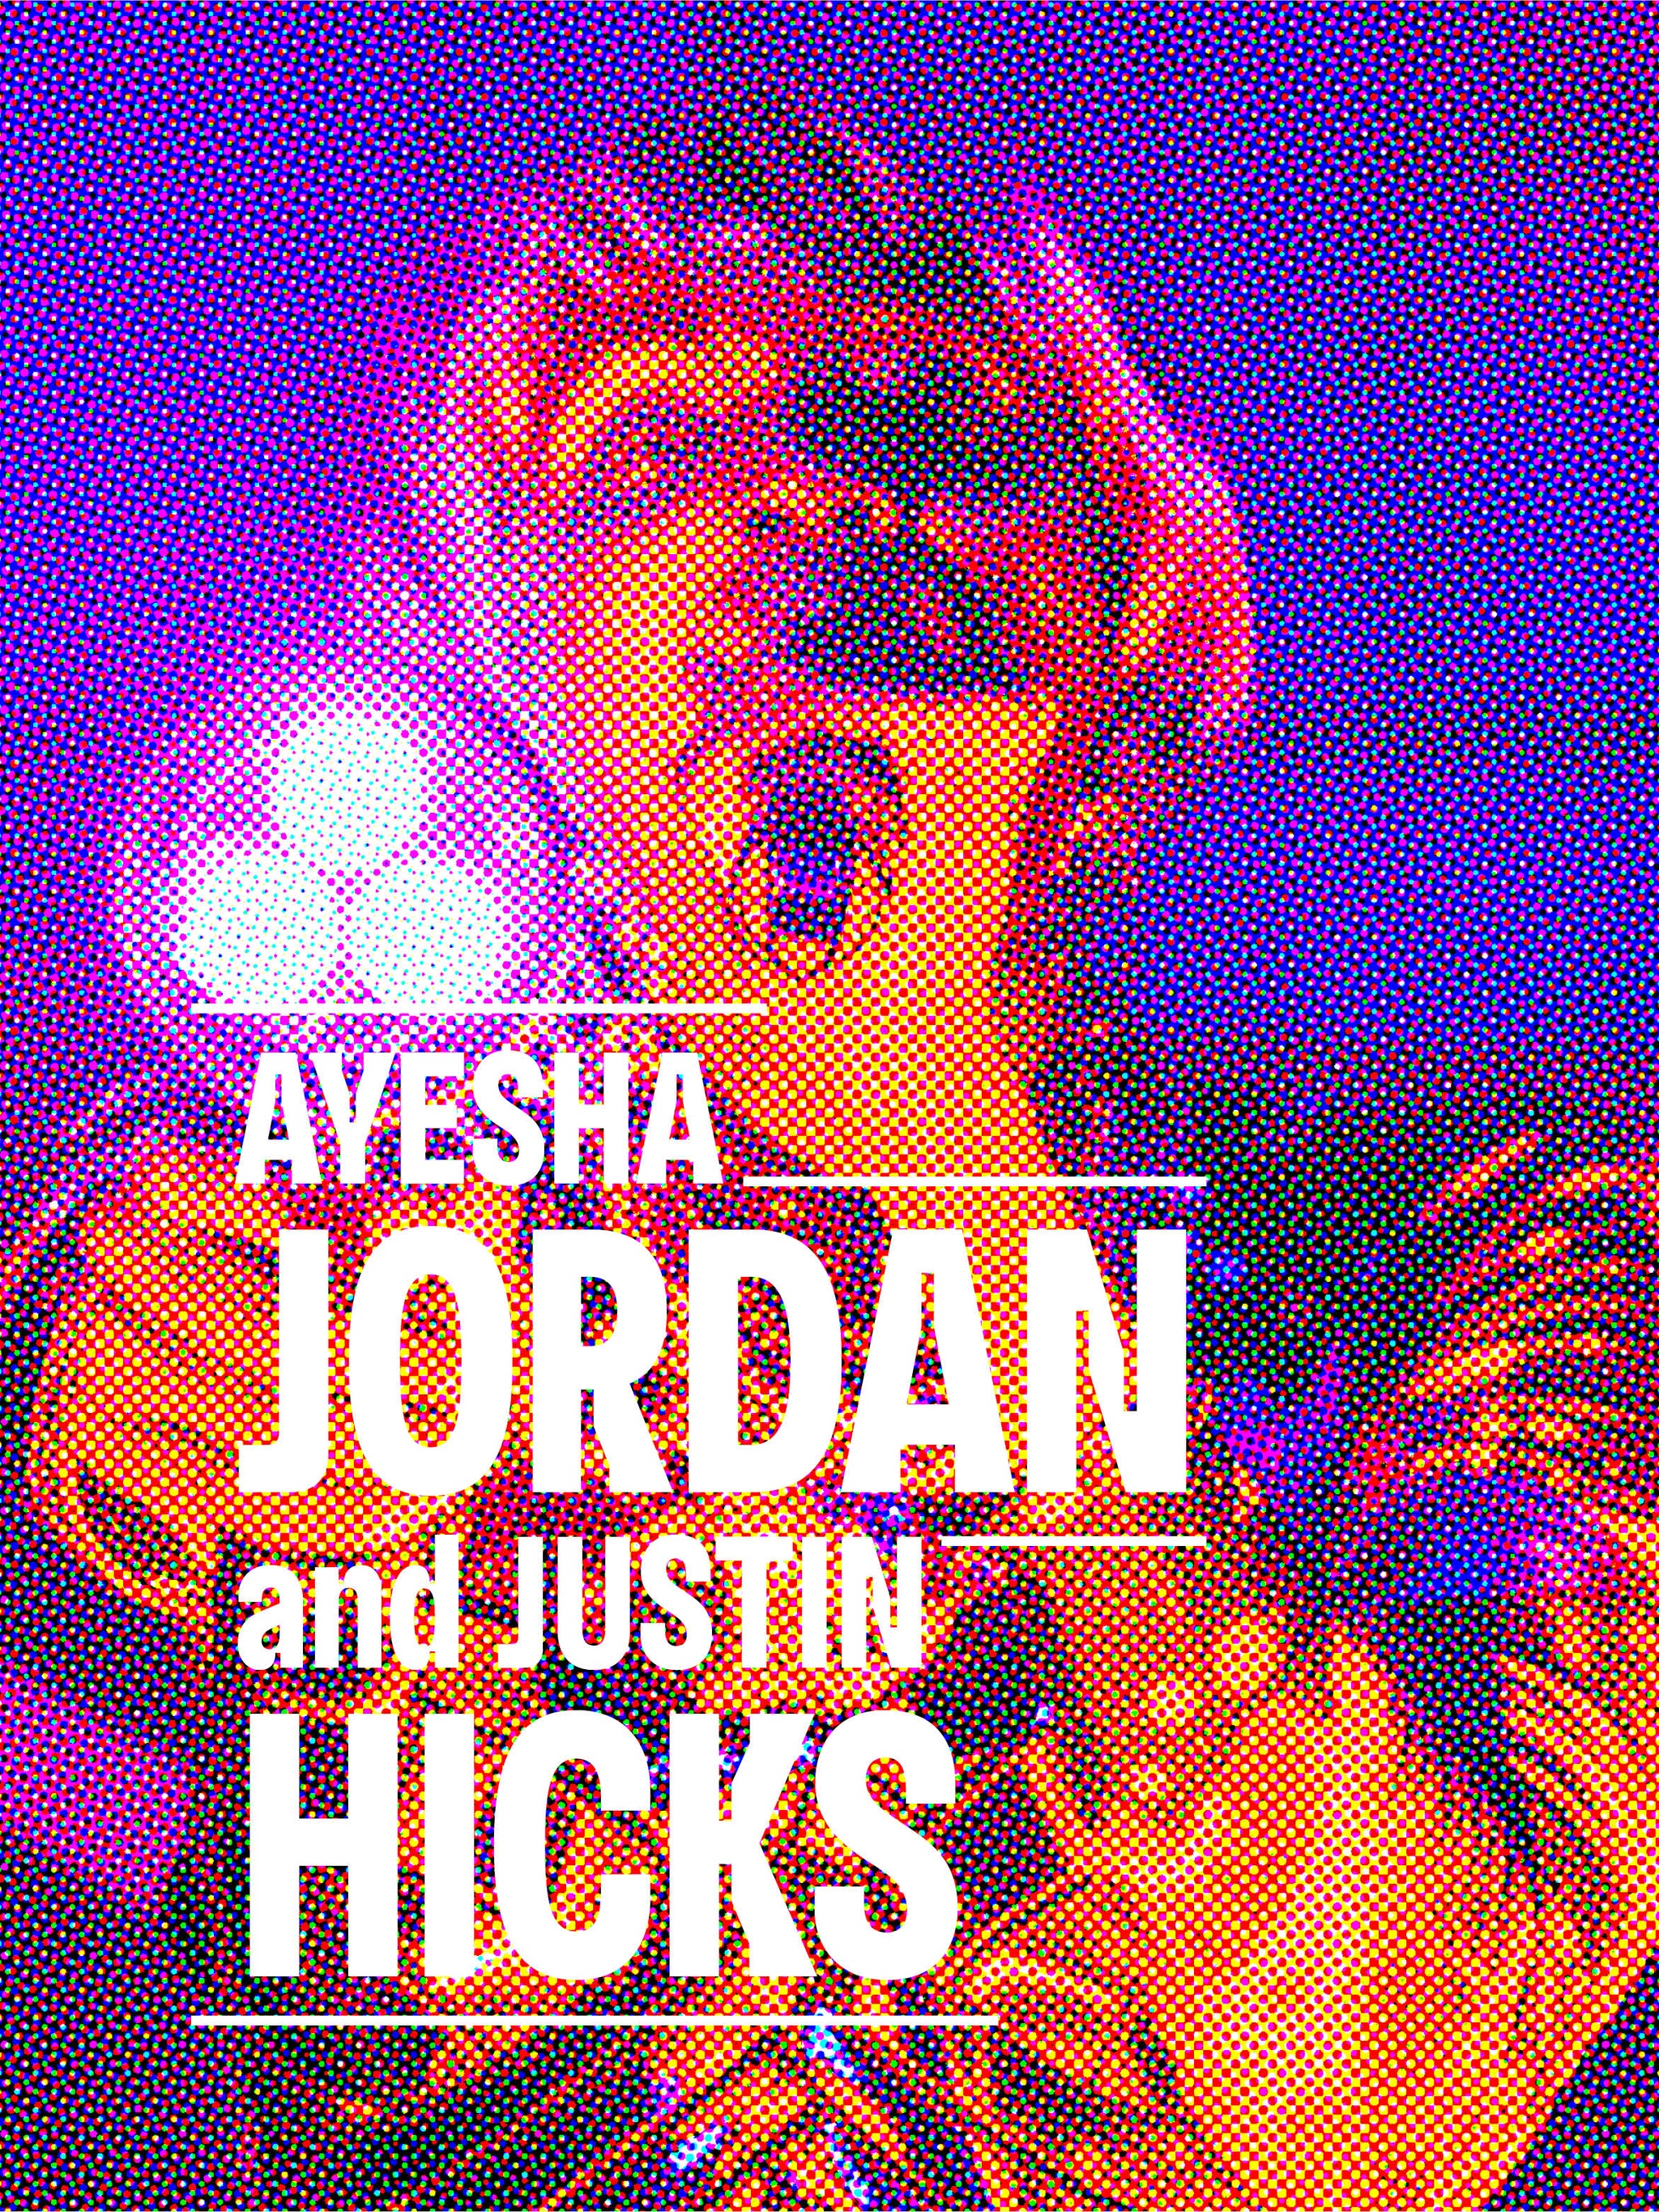 A photo of Shasta Geaux Pop singing into a microphone in neon purple, pink, and orange light with the artists' names Ayesha Jordan and Justin Hicks superimposed in white type